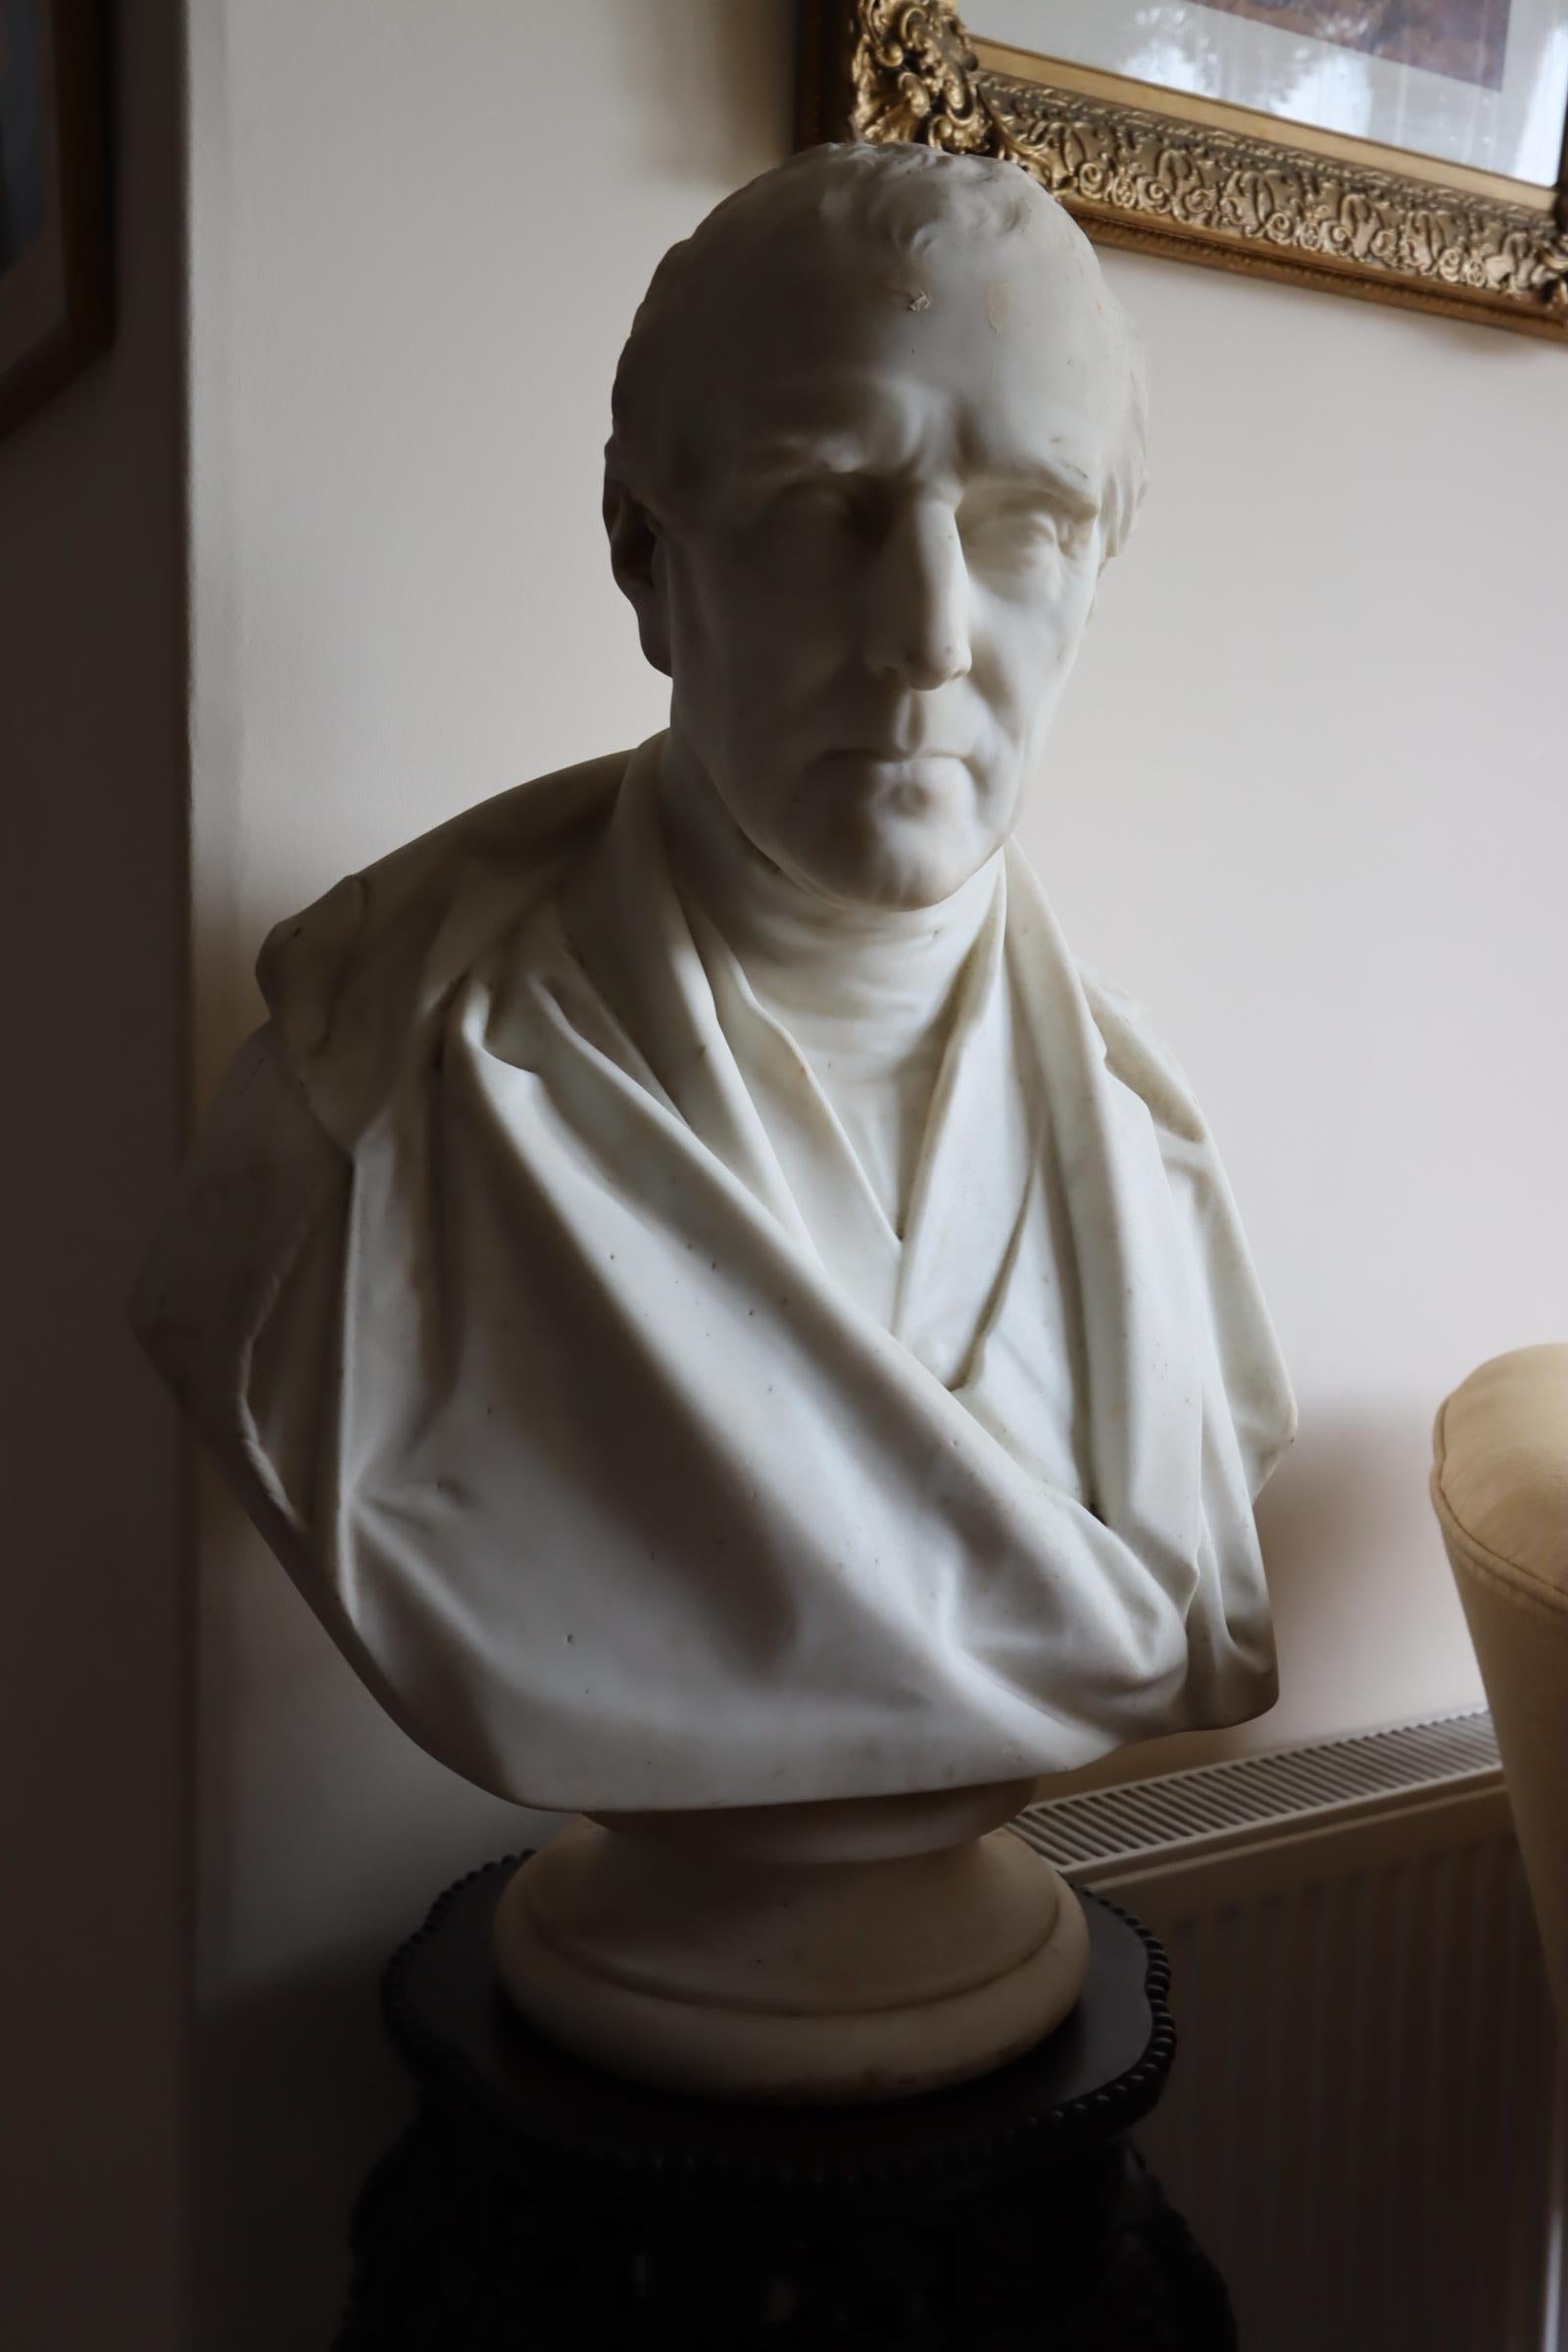 A CARRARA MARBLE BUST OF ARTHUR WELLESLEY, 1ST DUKE OF WELLINGTON, DATED 1854
Signed on the back and dated 1854
13 deep x 22 wide x 29.5 high inches